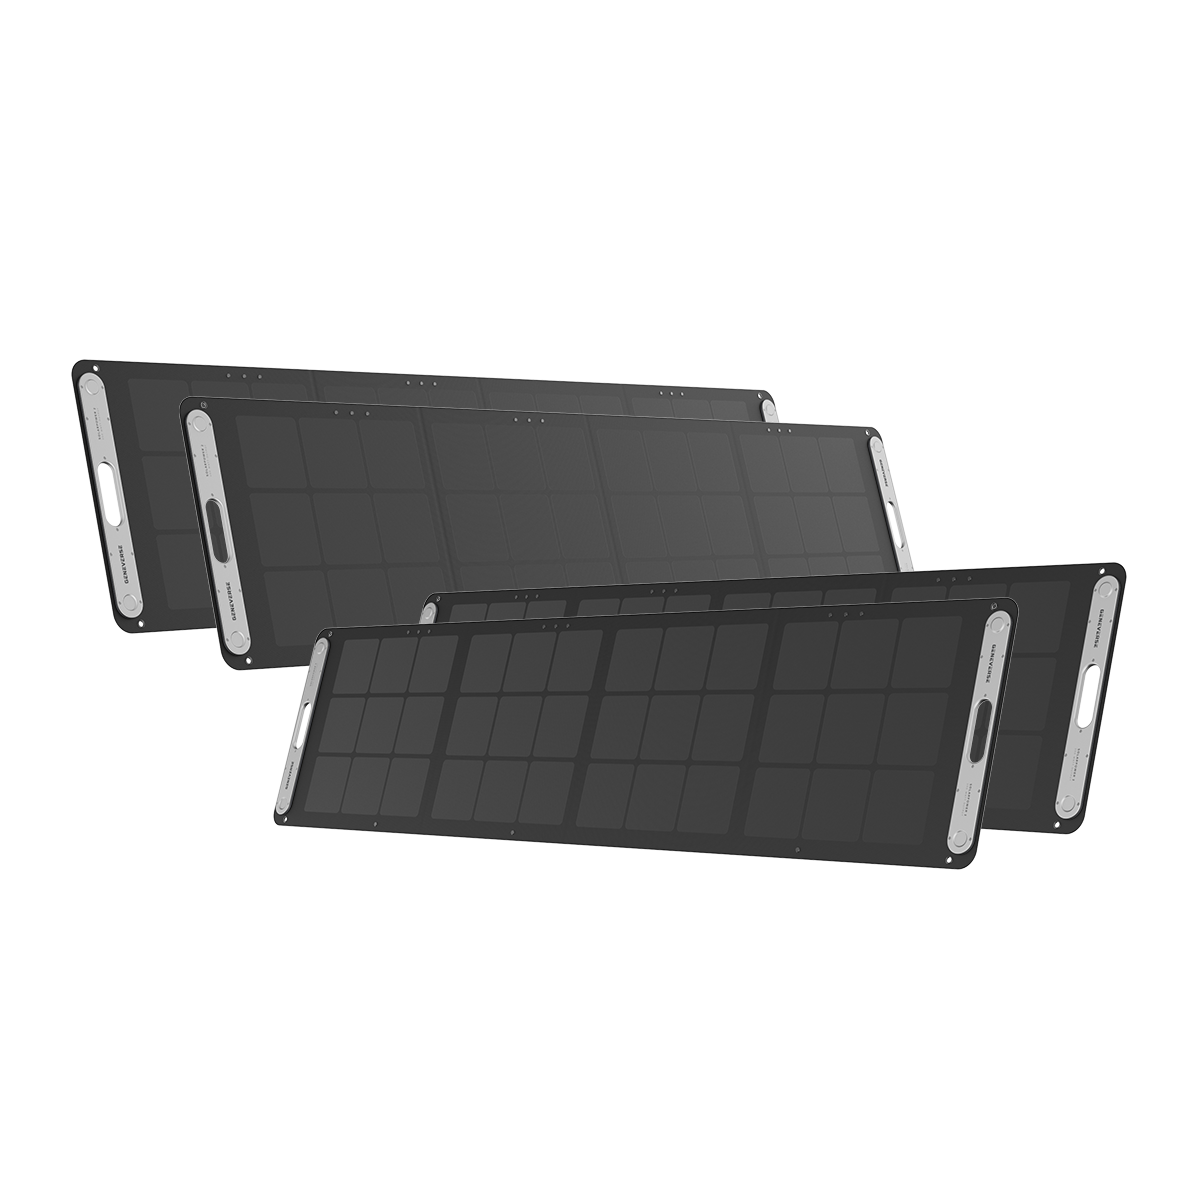 SolarPower 2: All-Weather Portable Solar Panels (200W Max Output/Panel), 4 Panels (800W Total Max Output)